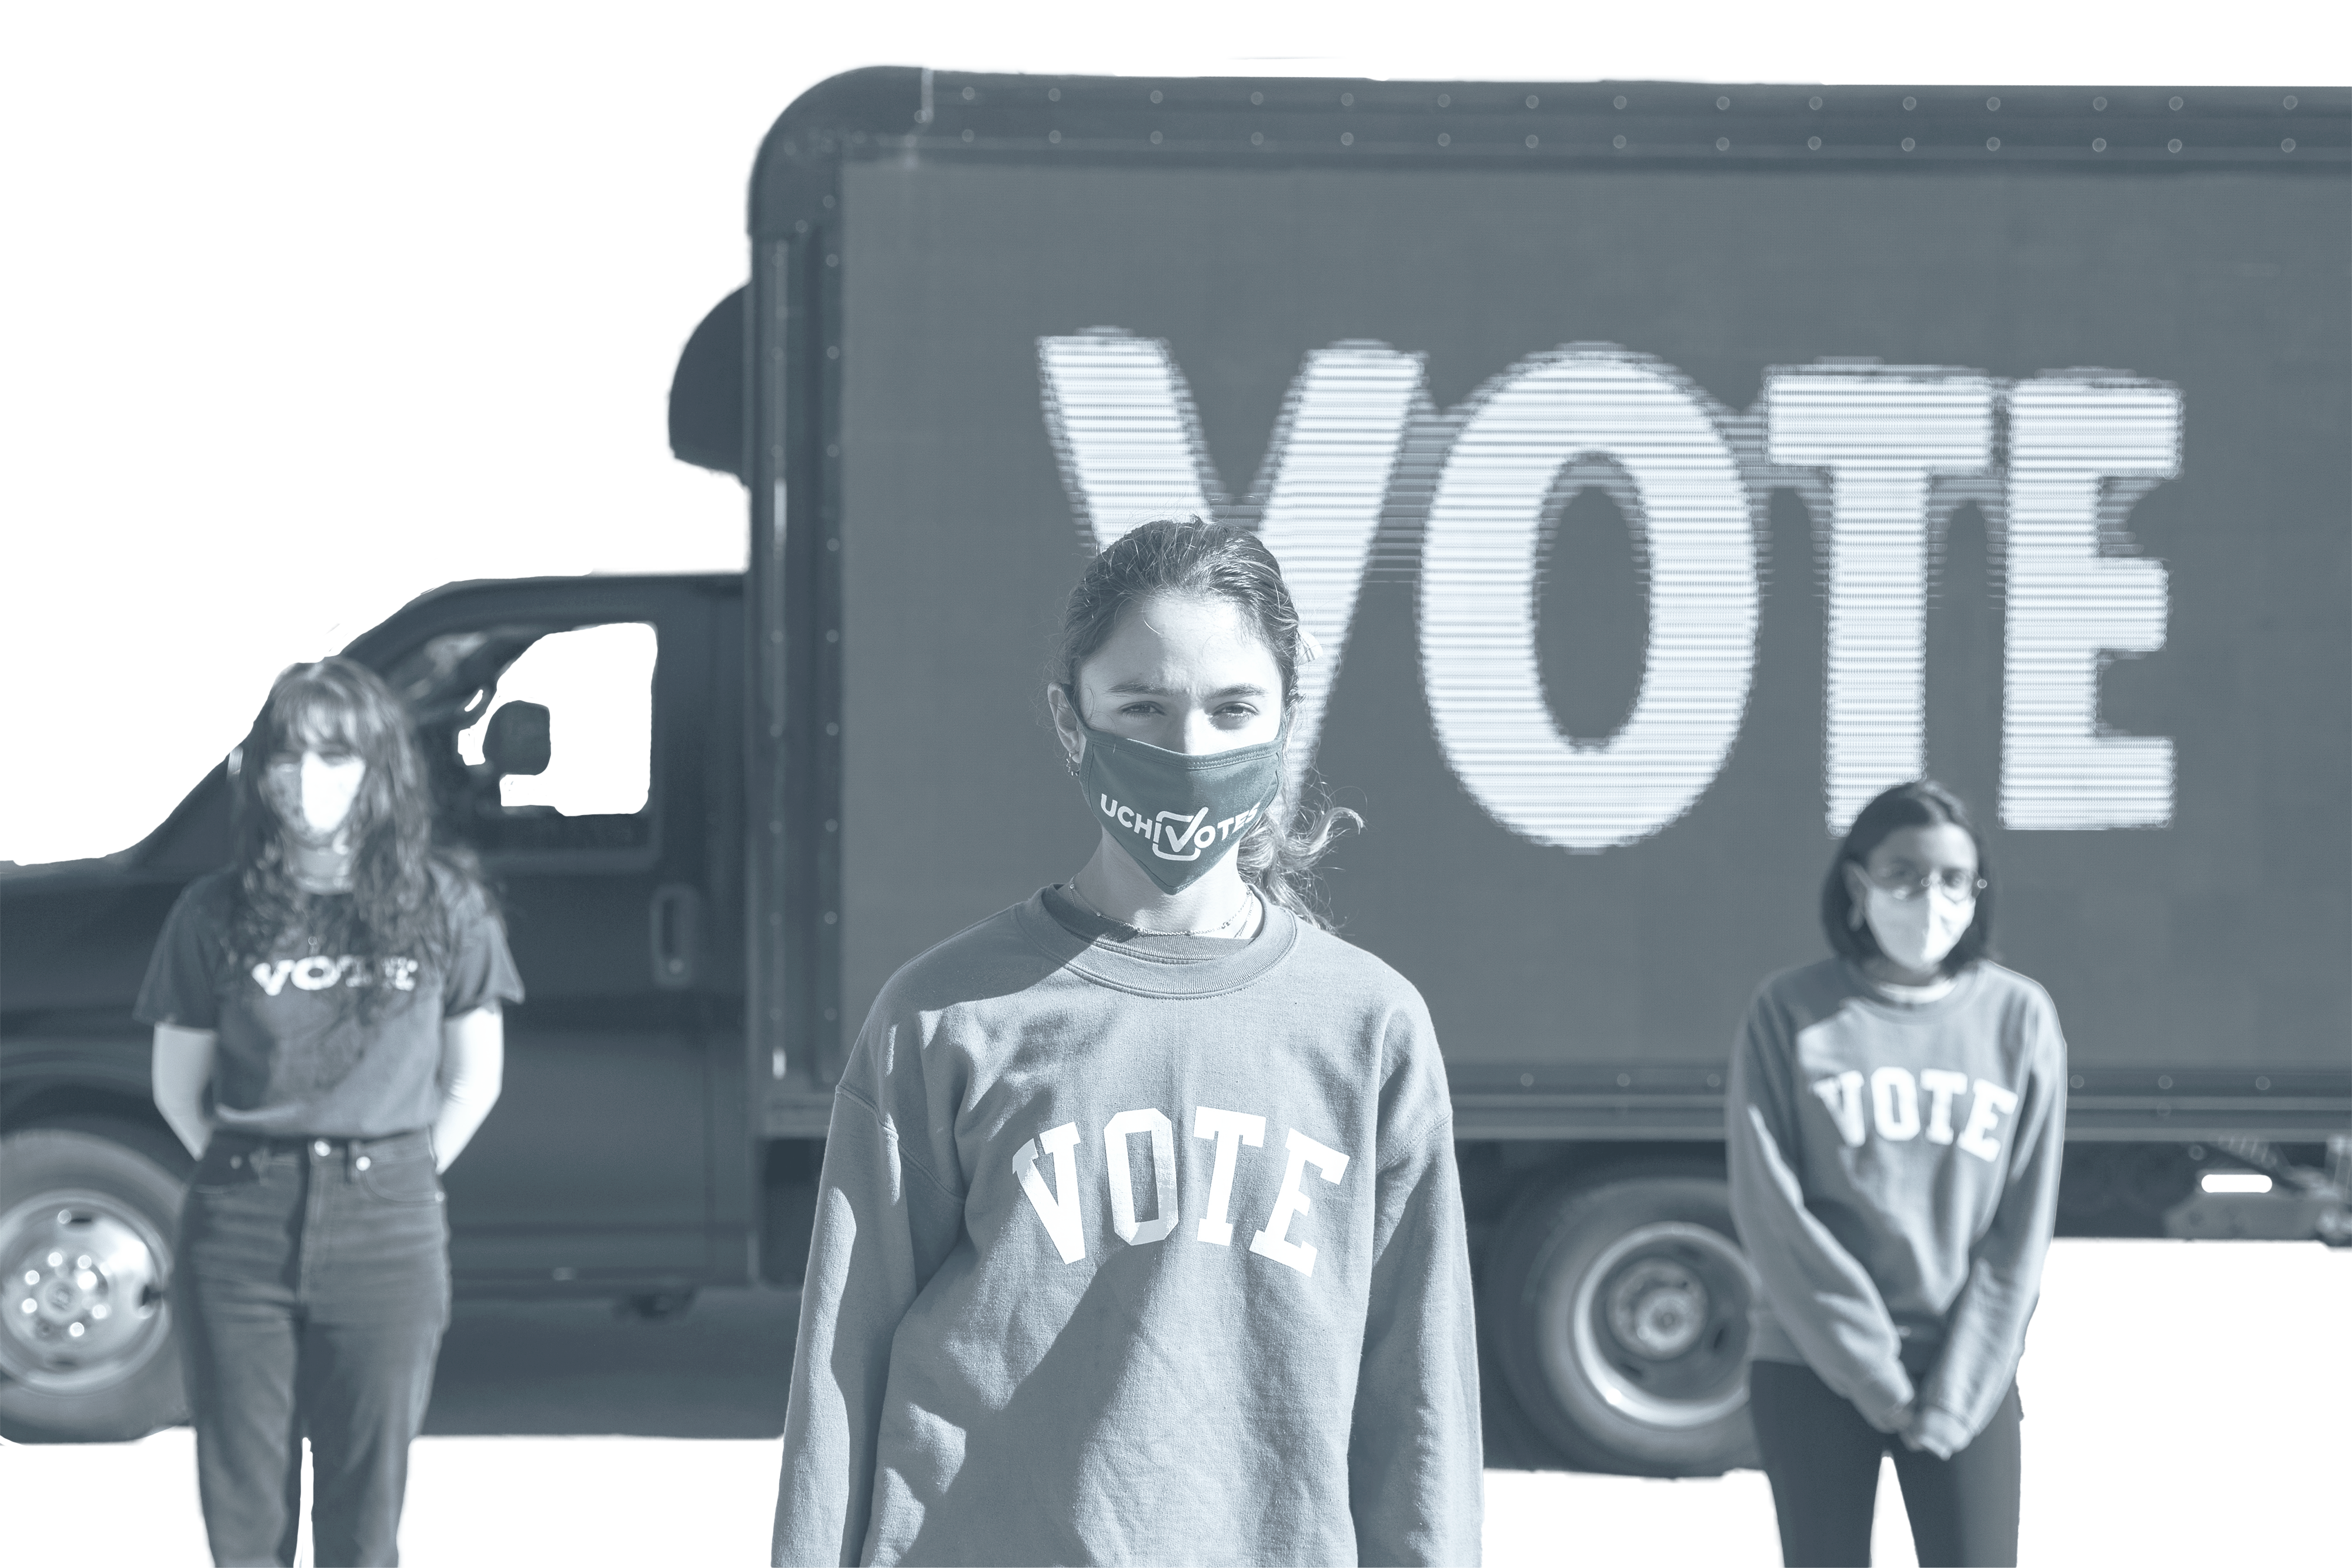 Students standing in front of truck with sign that reads "Vote"